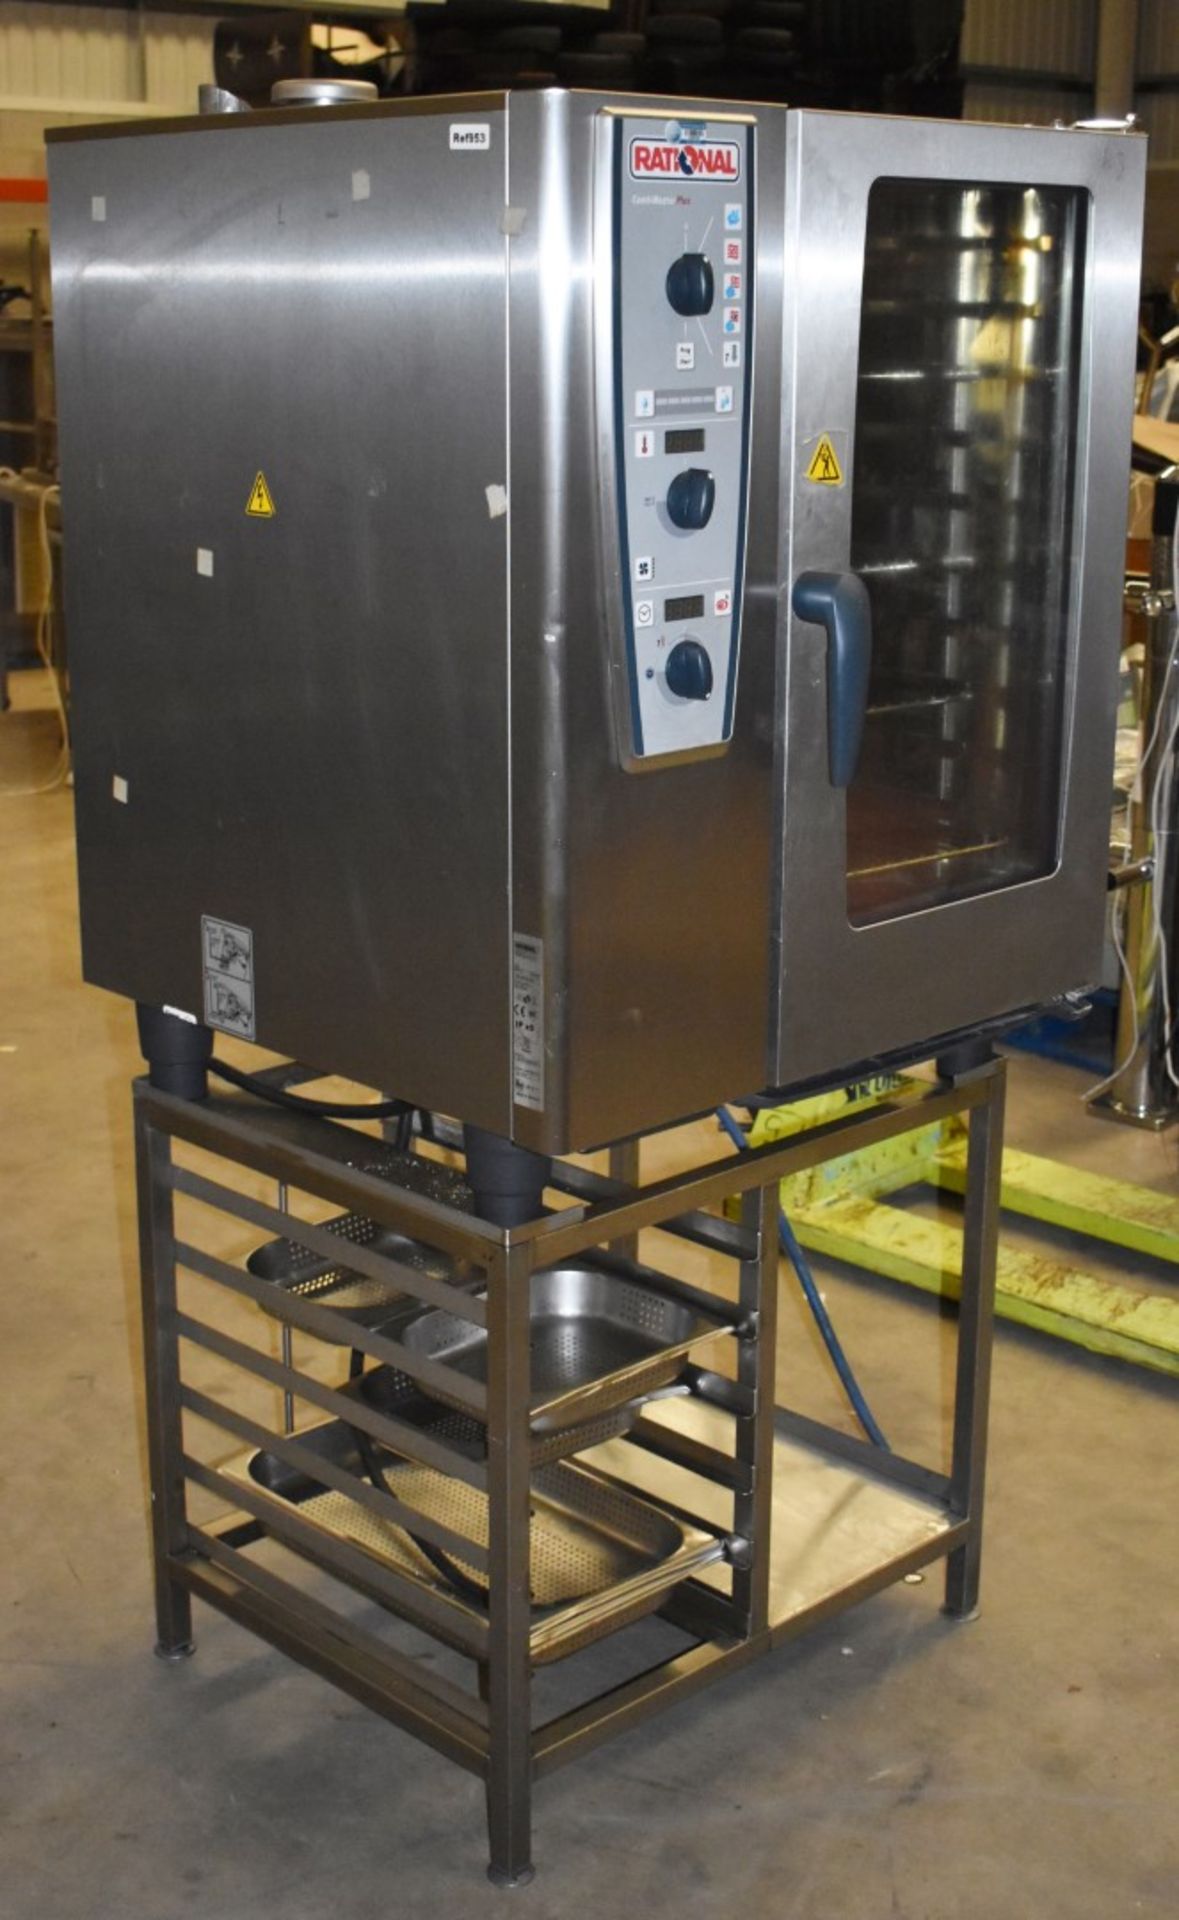 1 x Rational CMP101 CombiMaster Plus Model 101 3 Phase 10 Grid Combi Oven With Stand - H175 x W85 - Image 5 of 10